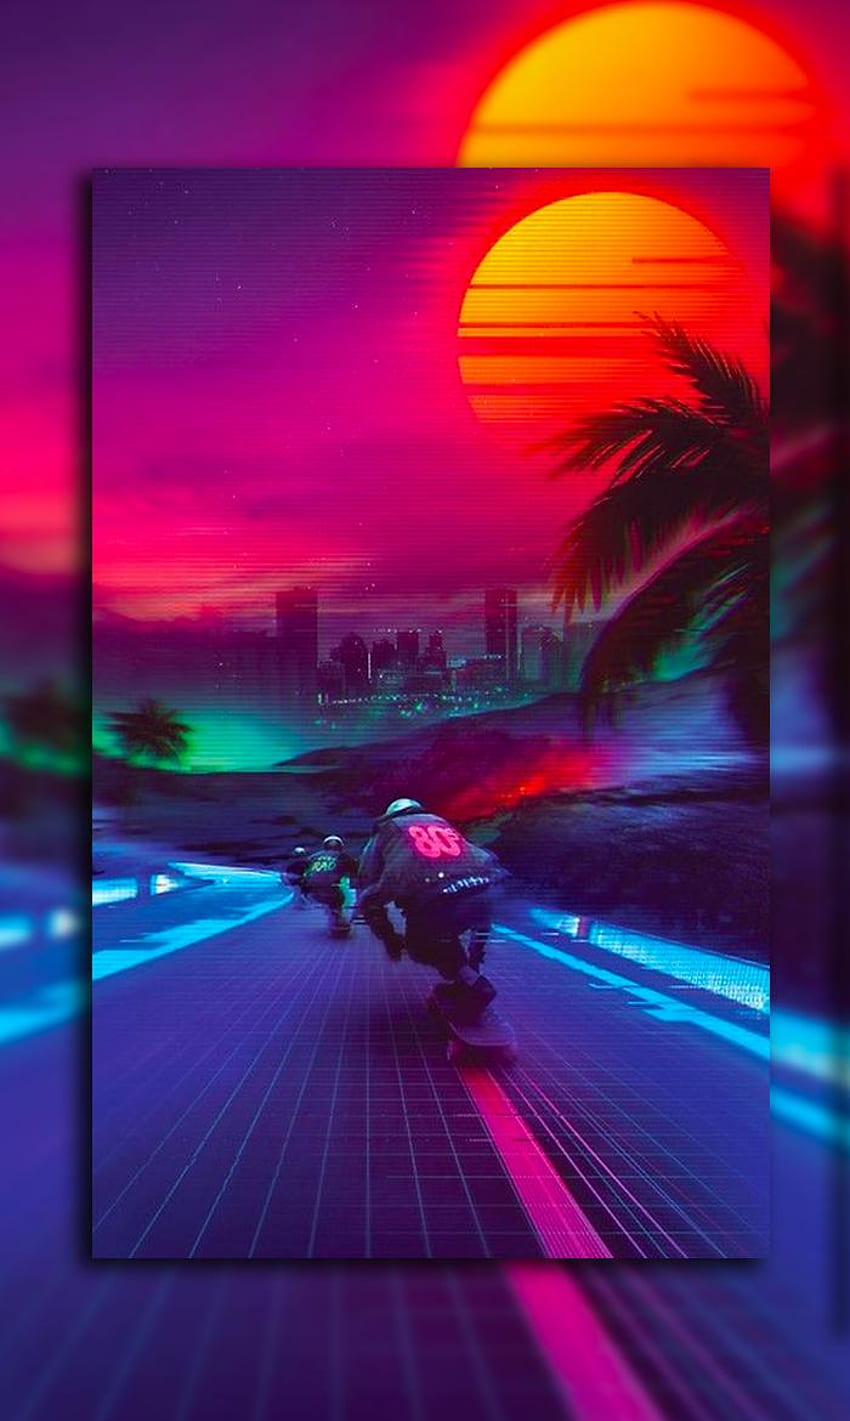 A neon poster of the future with palm trees - 80s